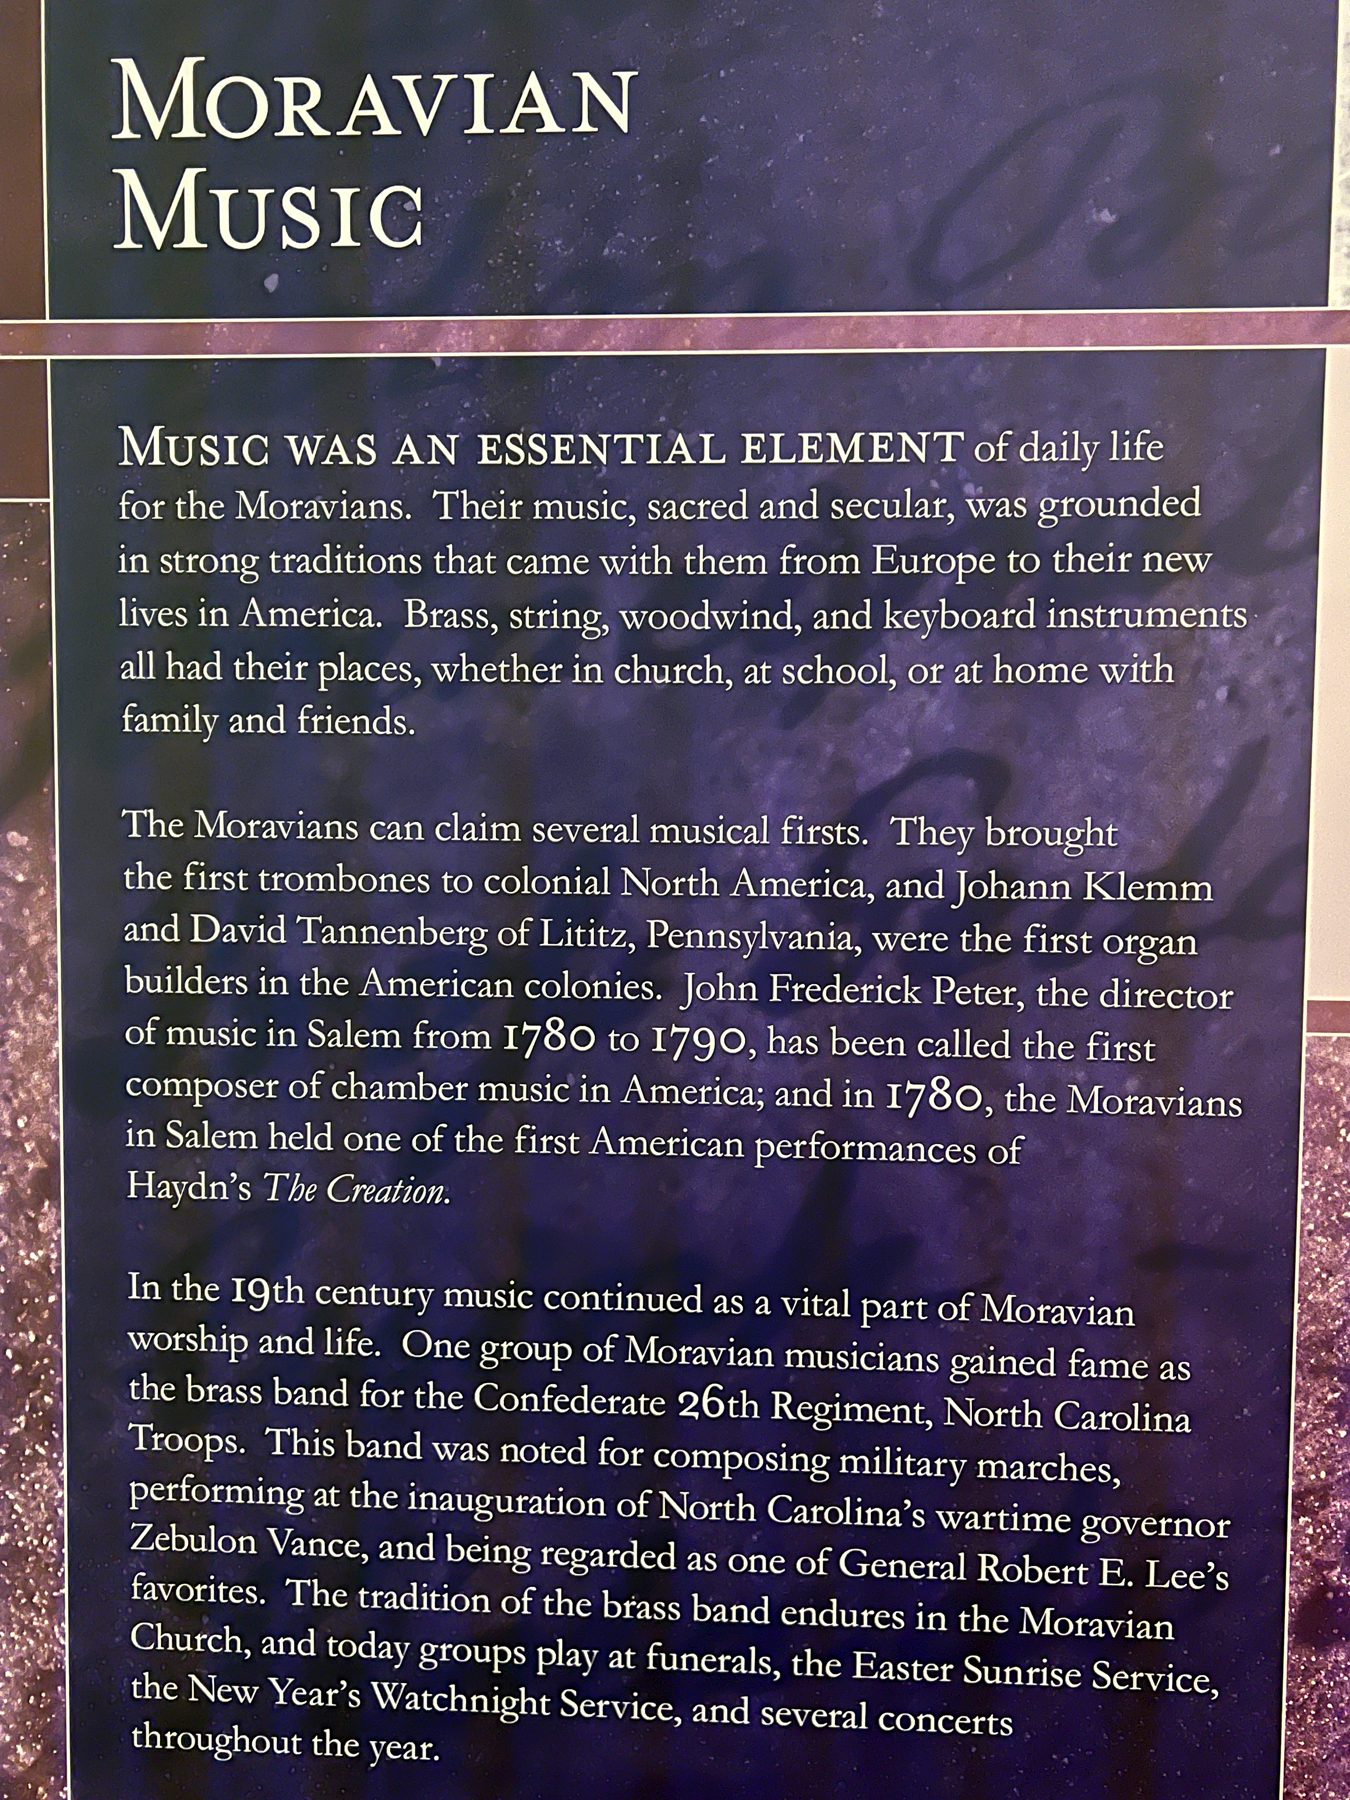 sign about Moravian Music